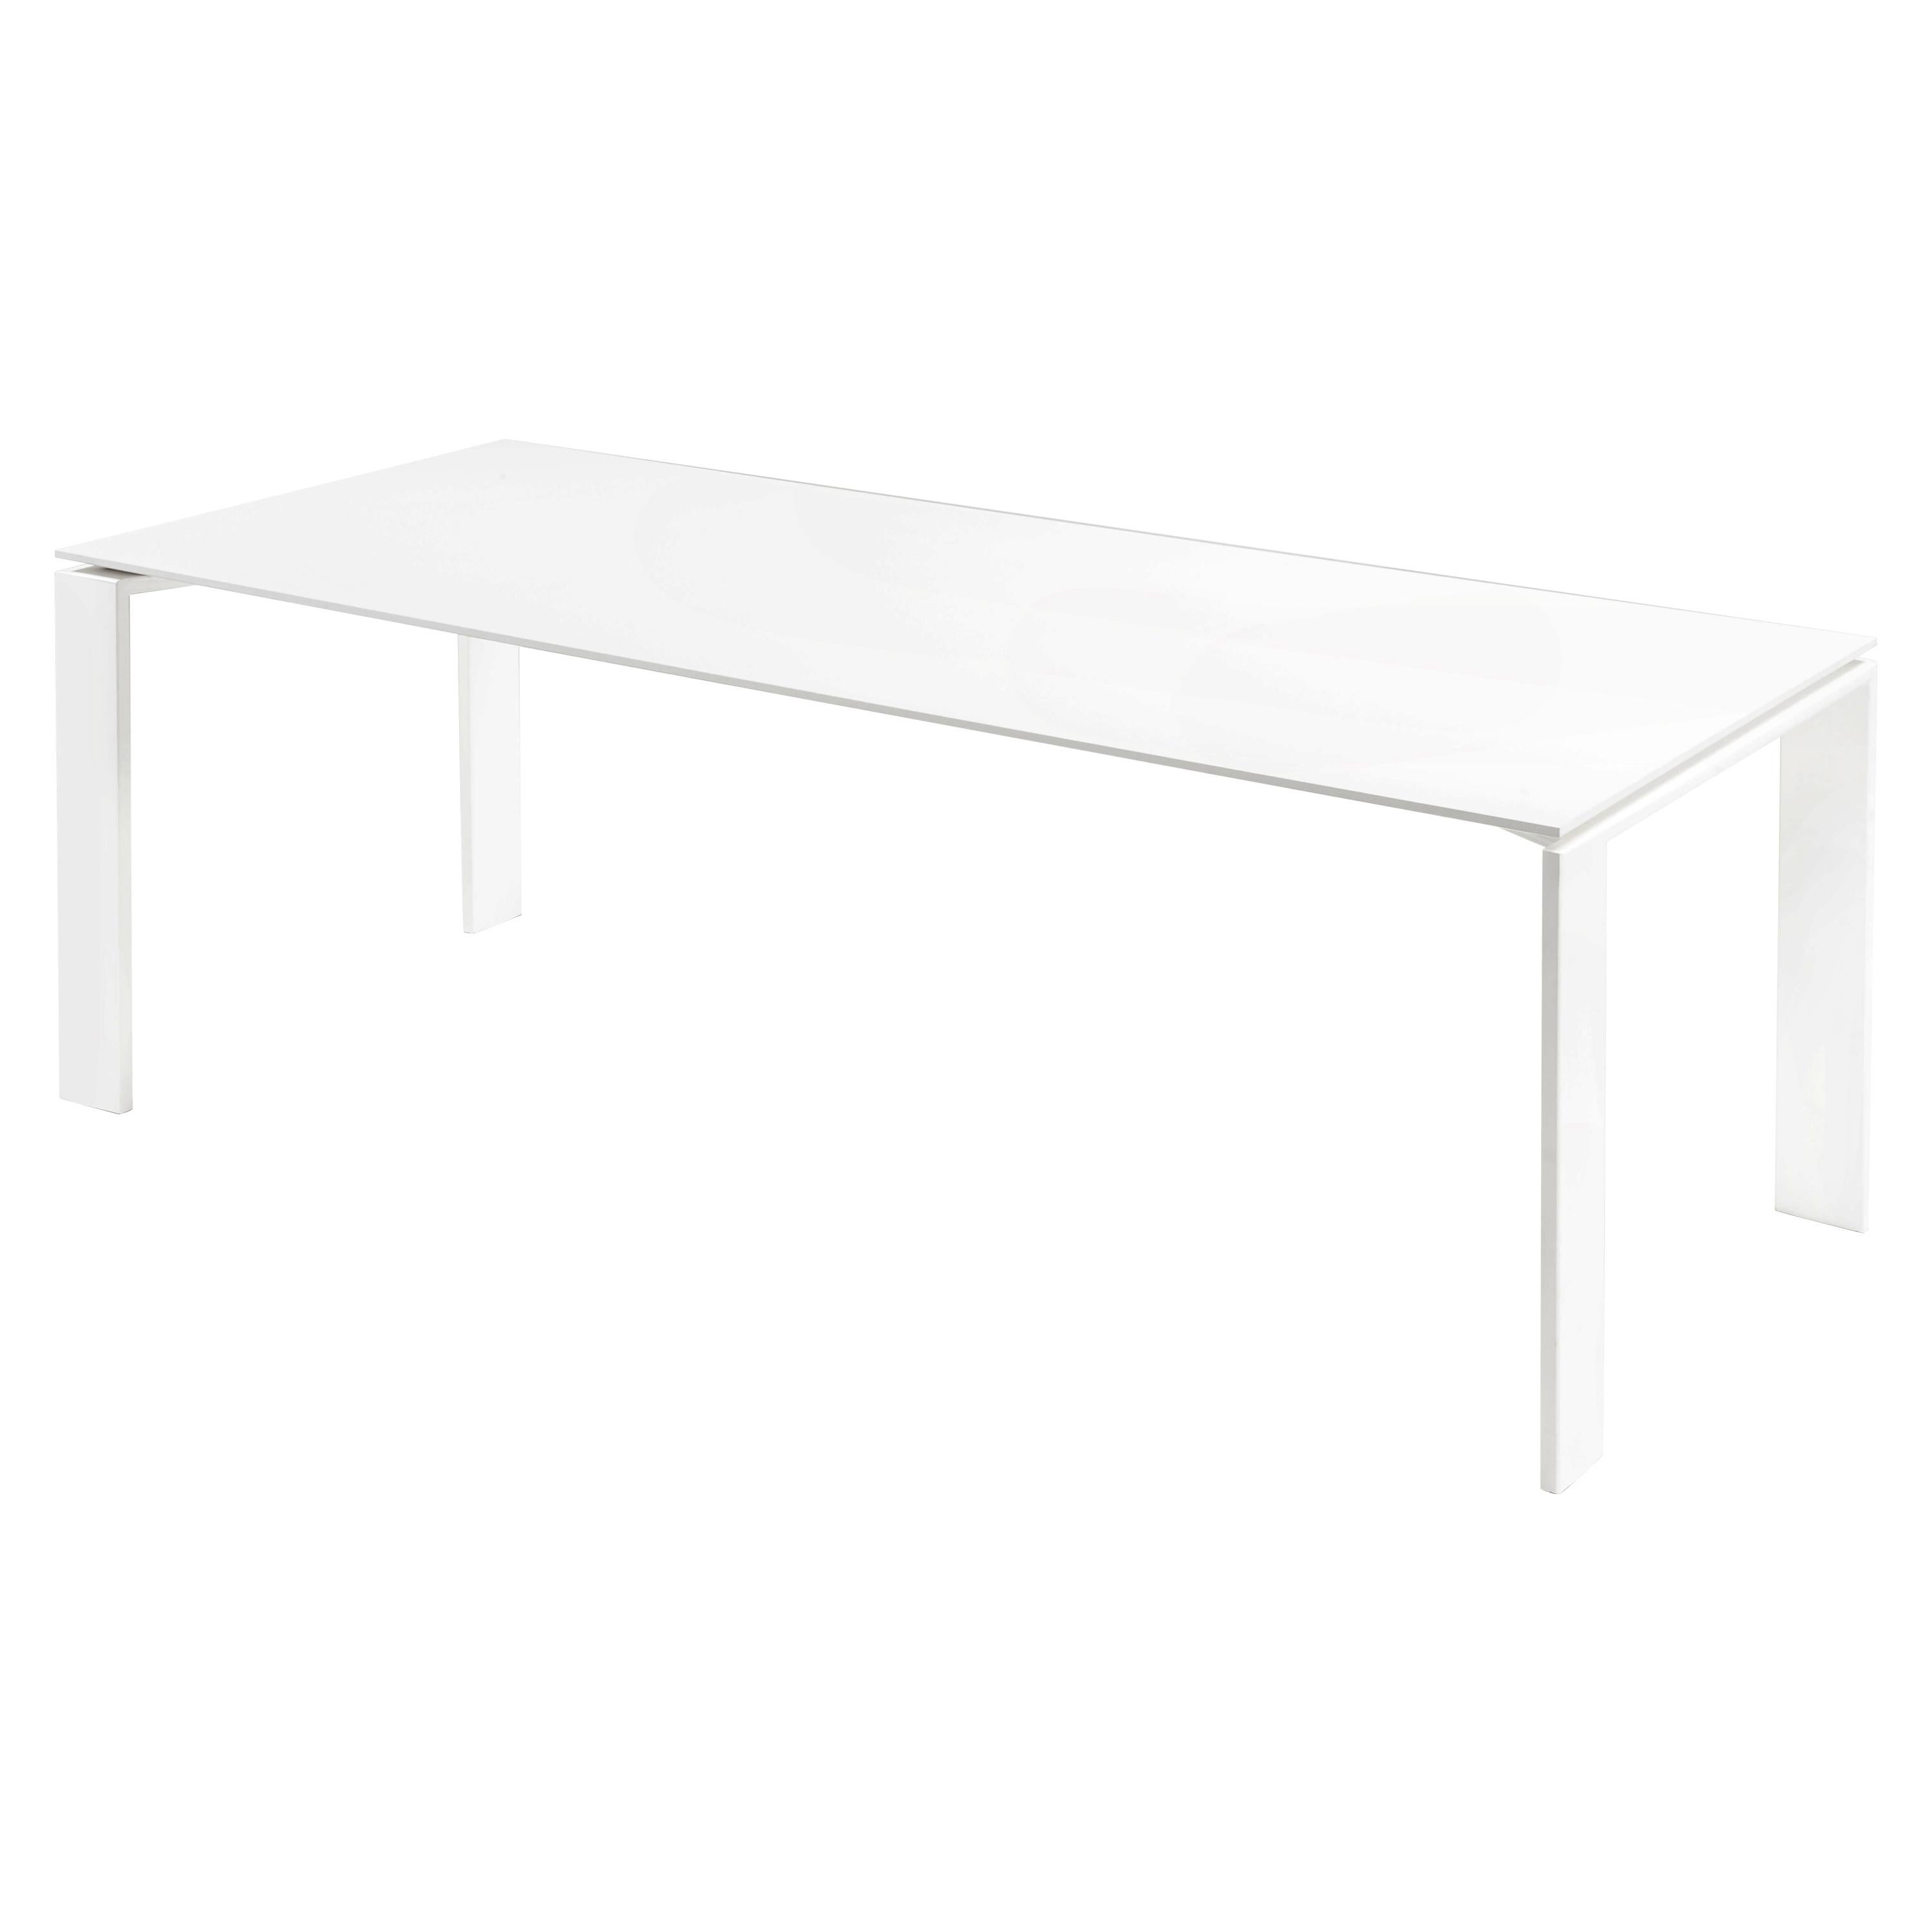 Kartell Outdoor Four Table in White by Ferruccio Laviani